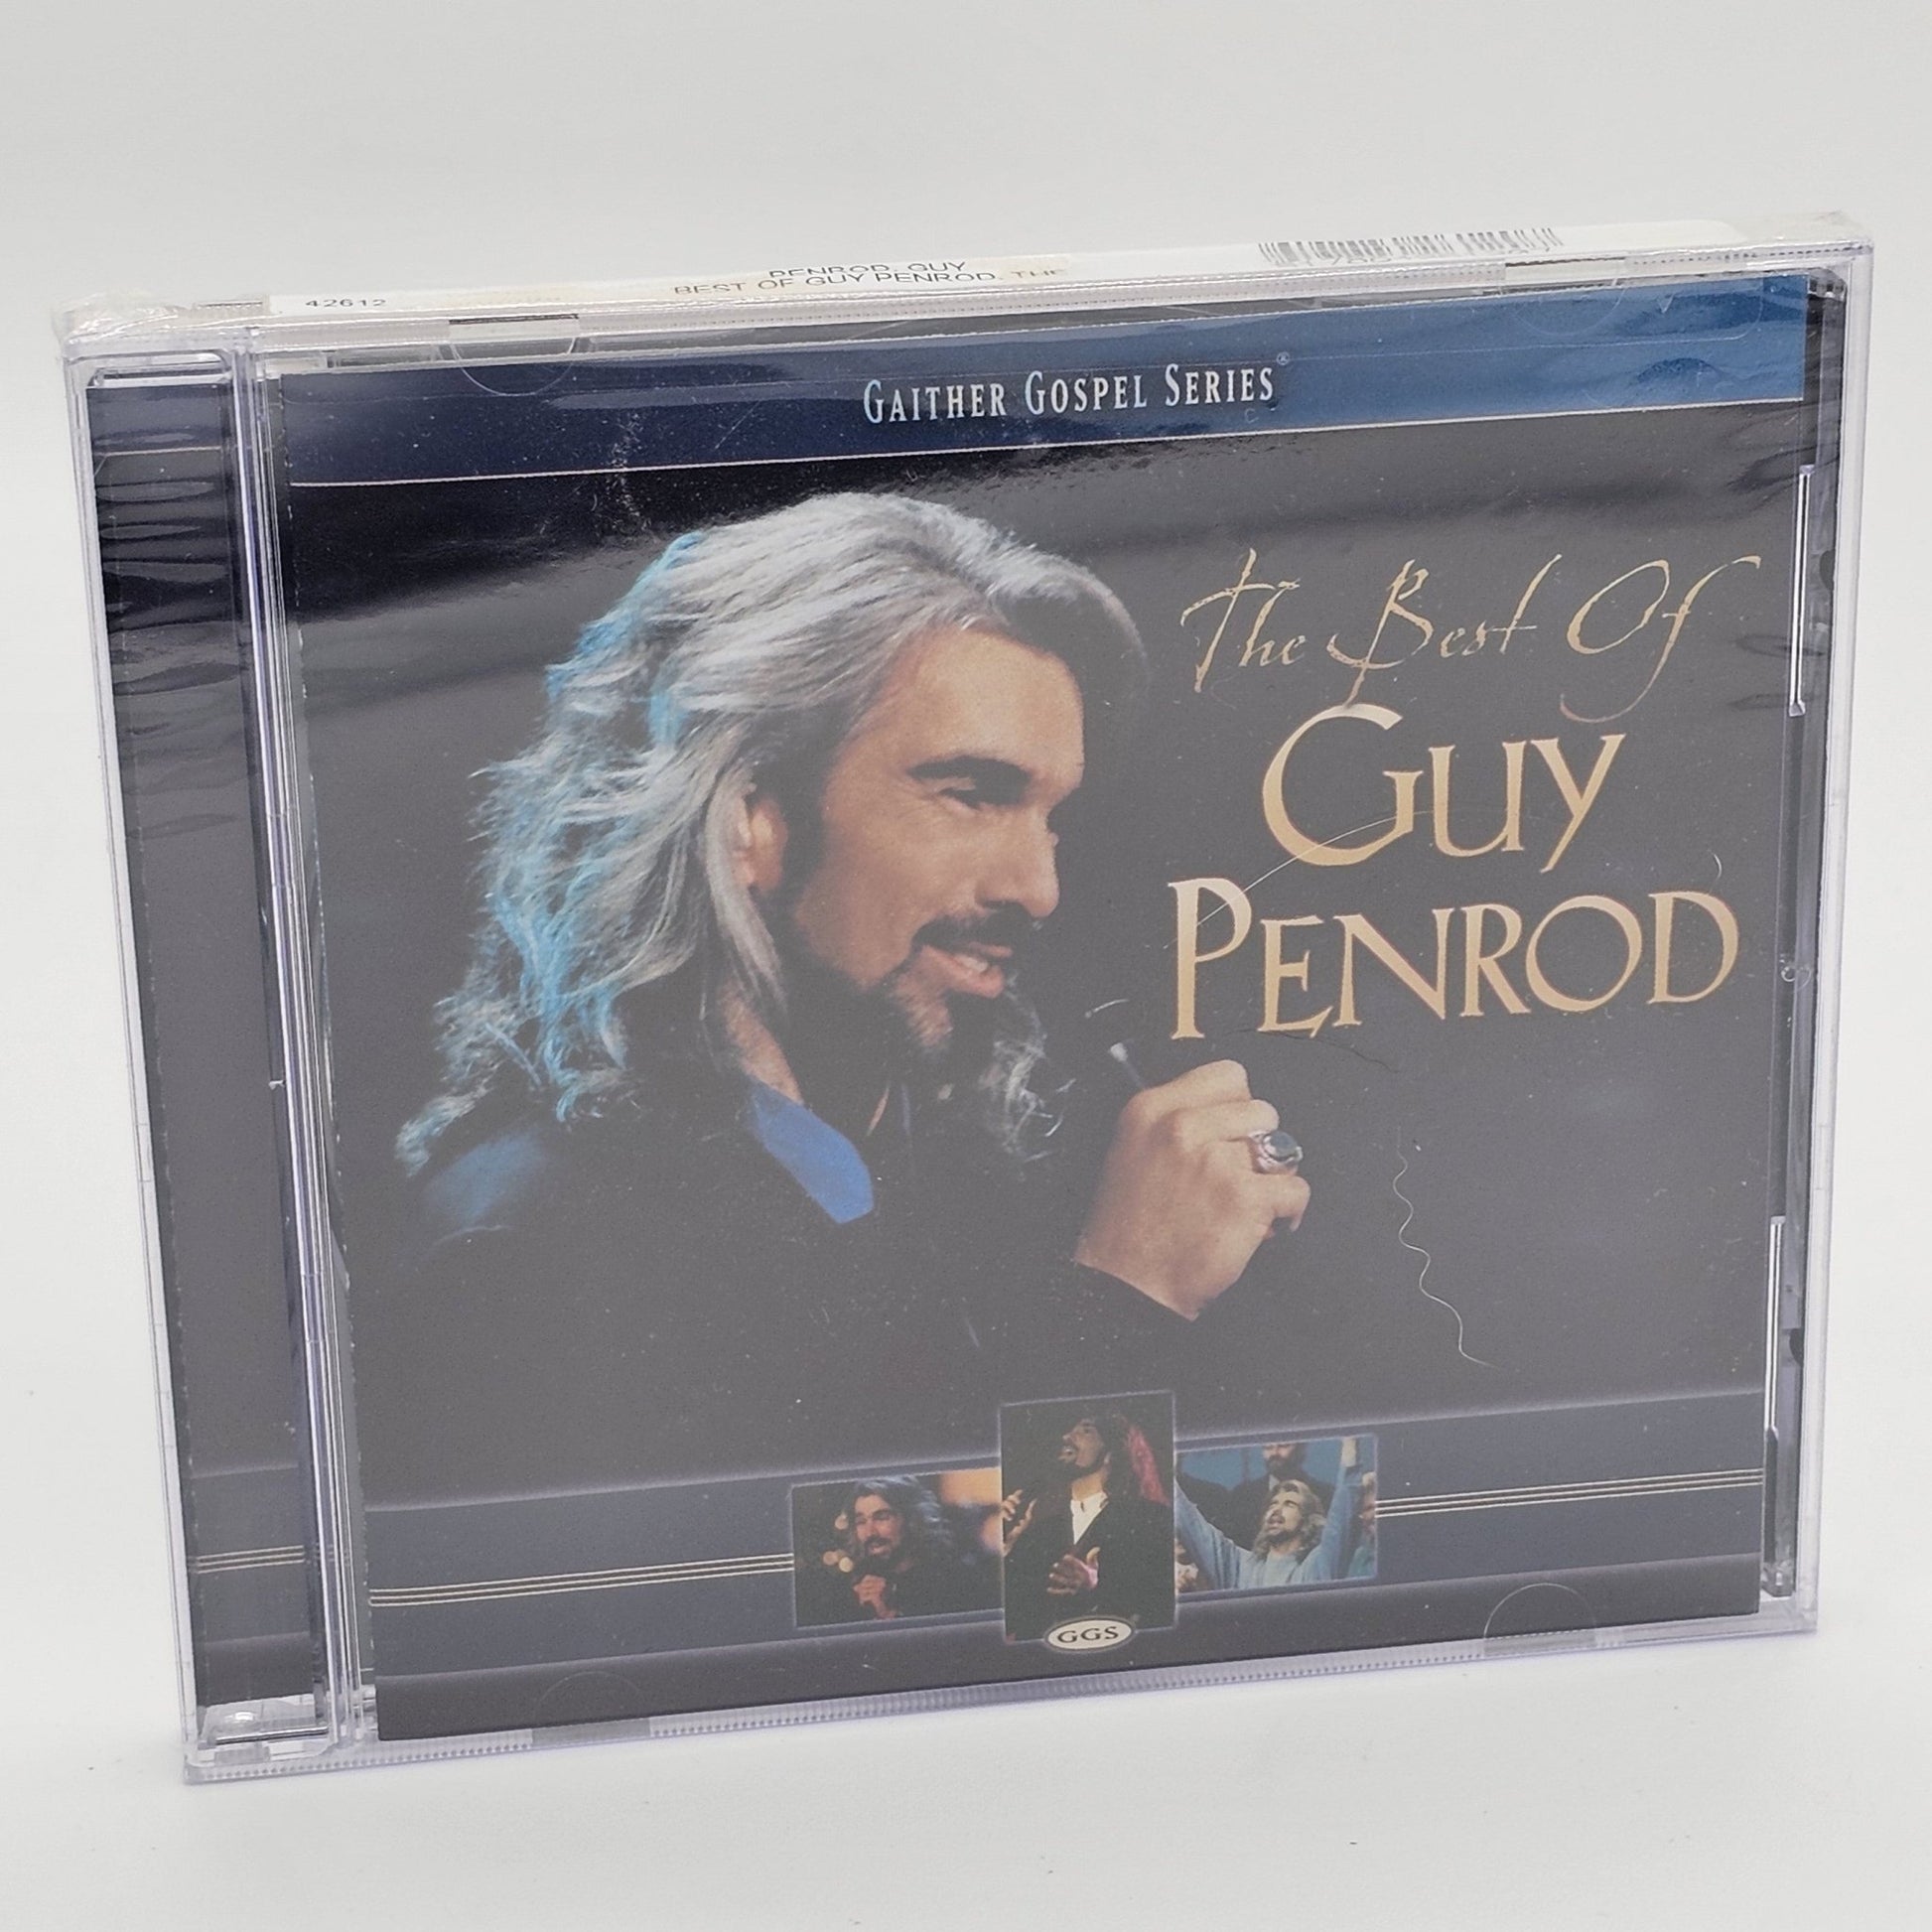 Spring House Music Group - Guy Penrod | The Best Of Guy Penrod | CD - Compact Disc - Steady Bunny Shop